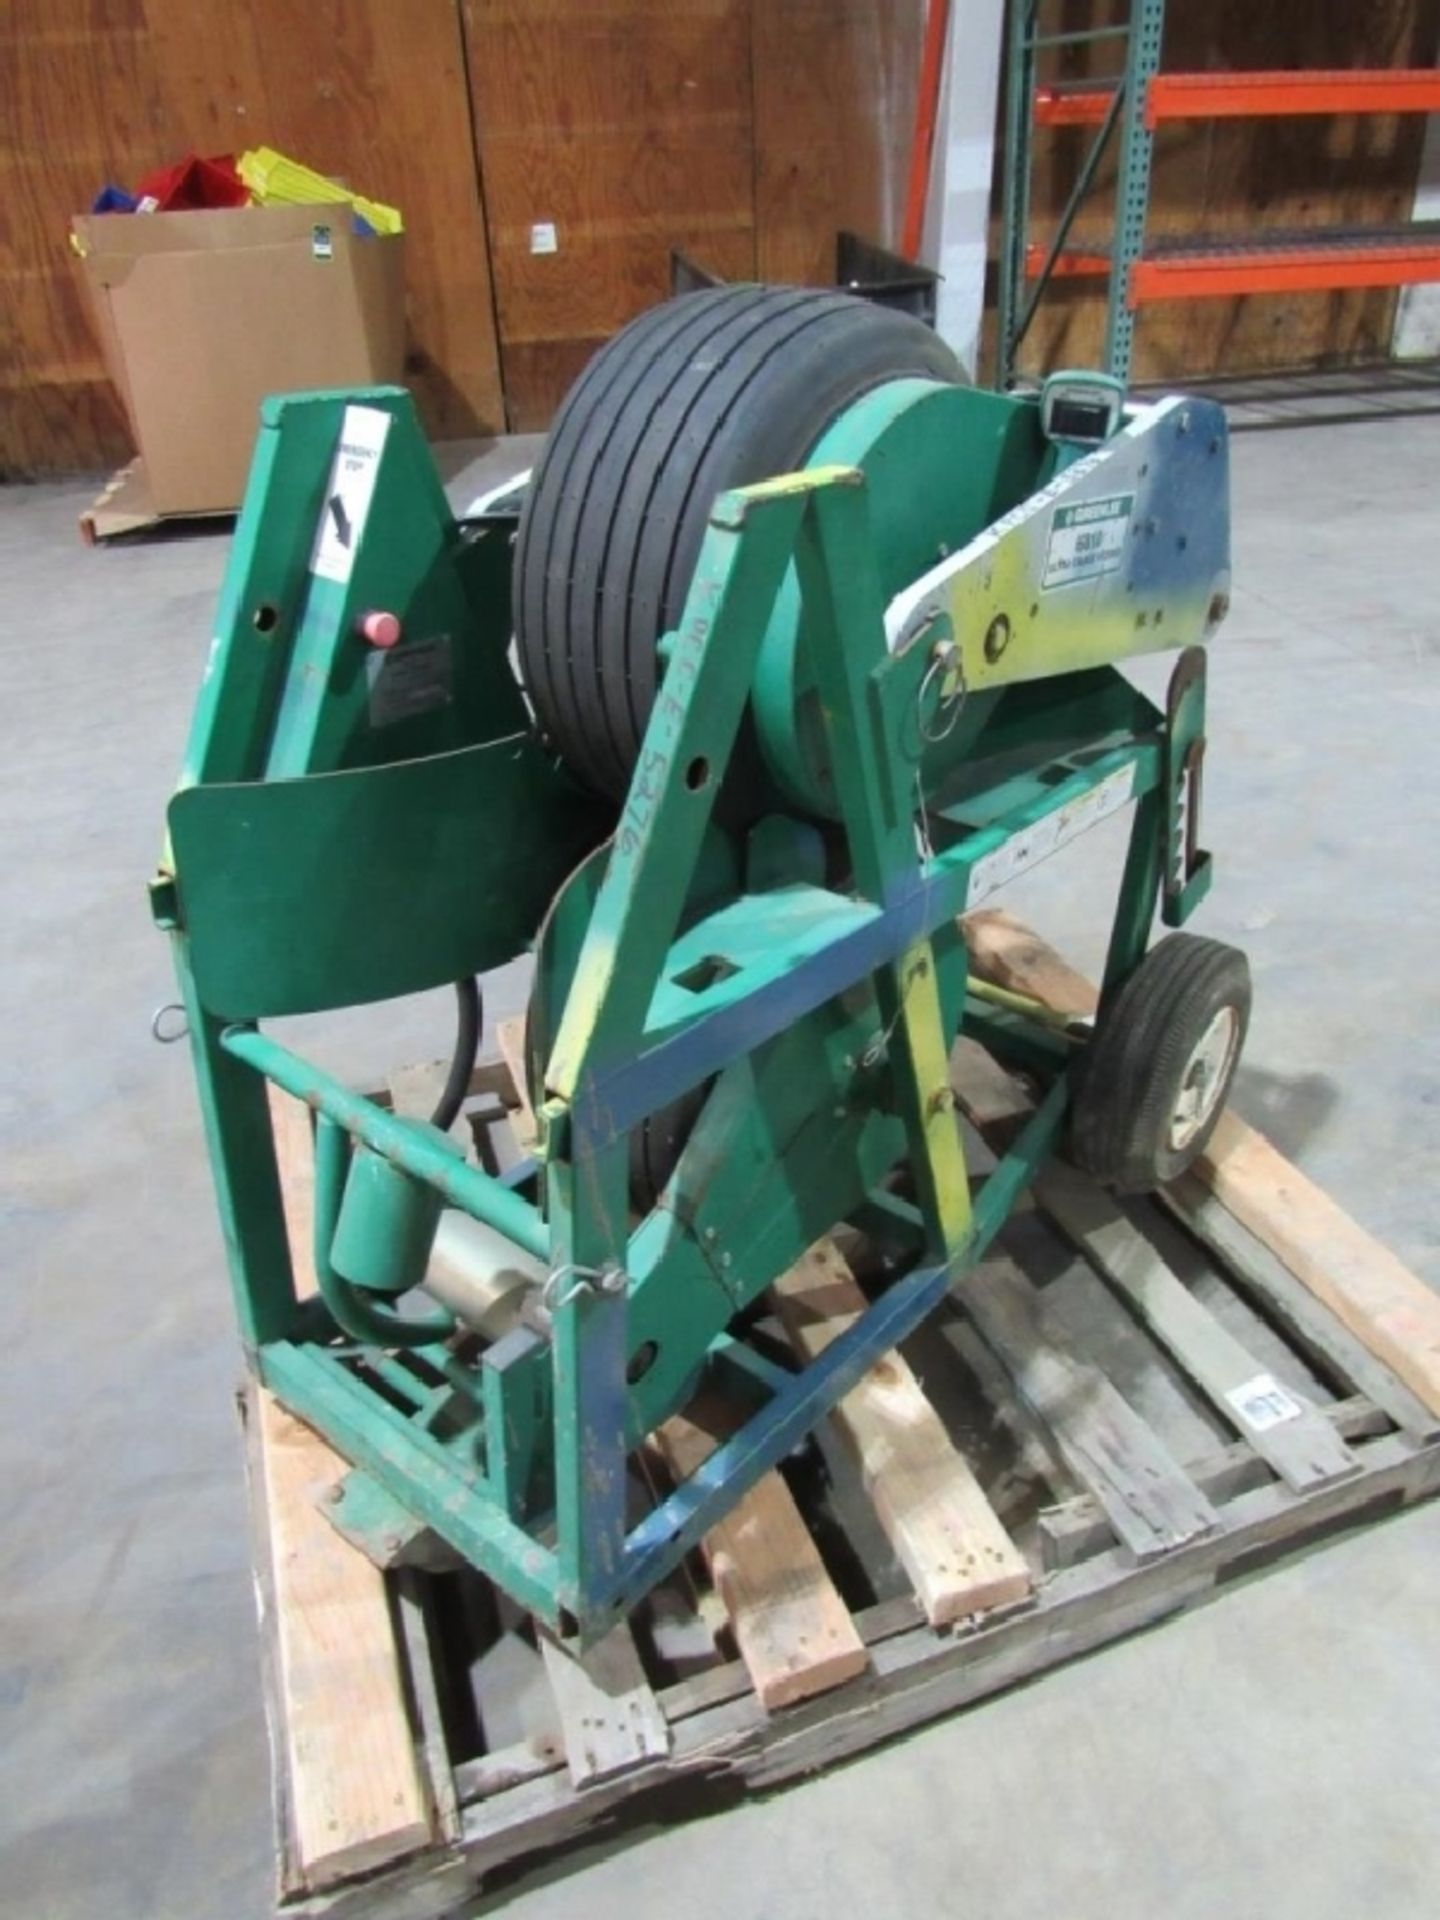 Ultra Cable Feeder- ***Located in Chattanooga TN*** MFR - Greenlee Model - 6810 120 VAC 4 Amps 50/60